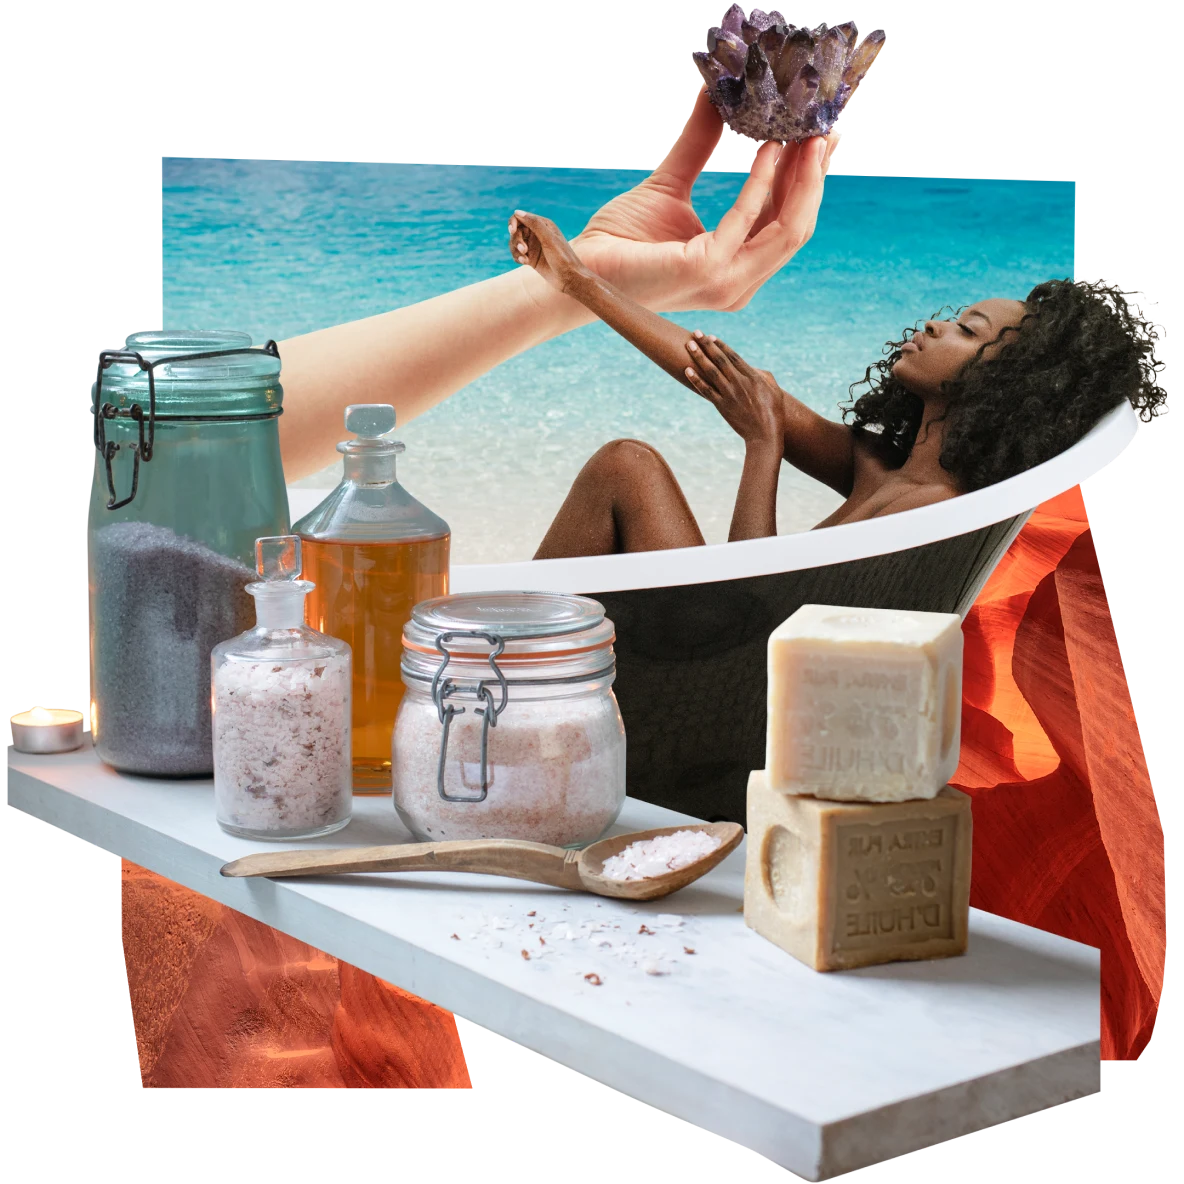 Collage of natural items. Glass containers and canisters filled with salts and oils. Big blocks of soap on the right. Black woman lounges in a dark wood and porcelain tub against a blue sea backdrop.